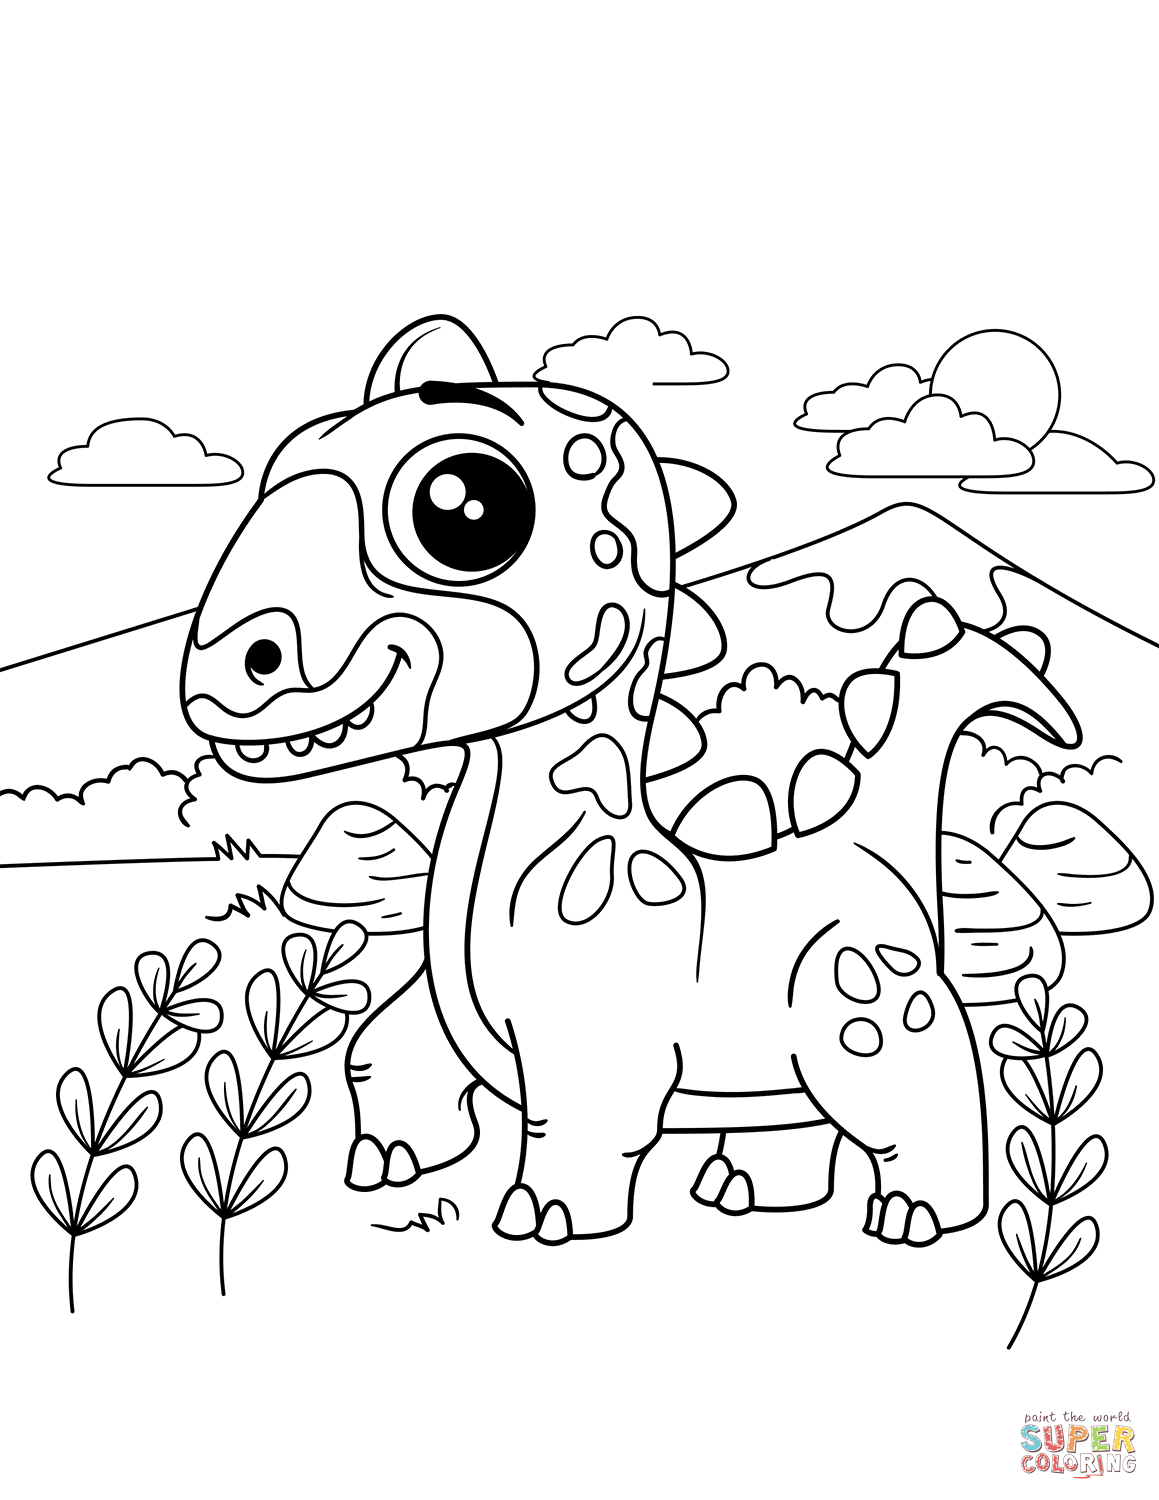 Cute Dinosaur coloring page | Free Printable Coloring Pages